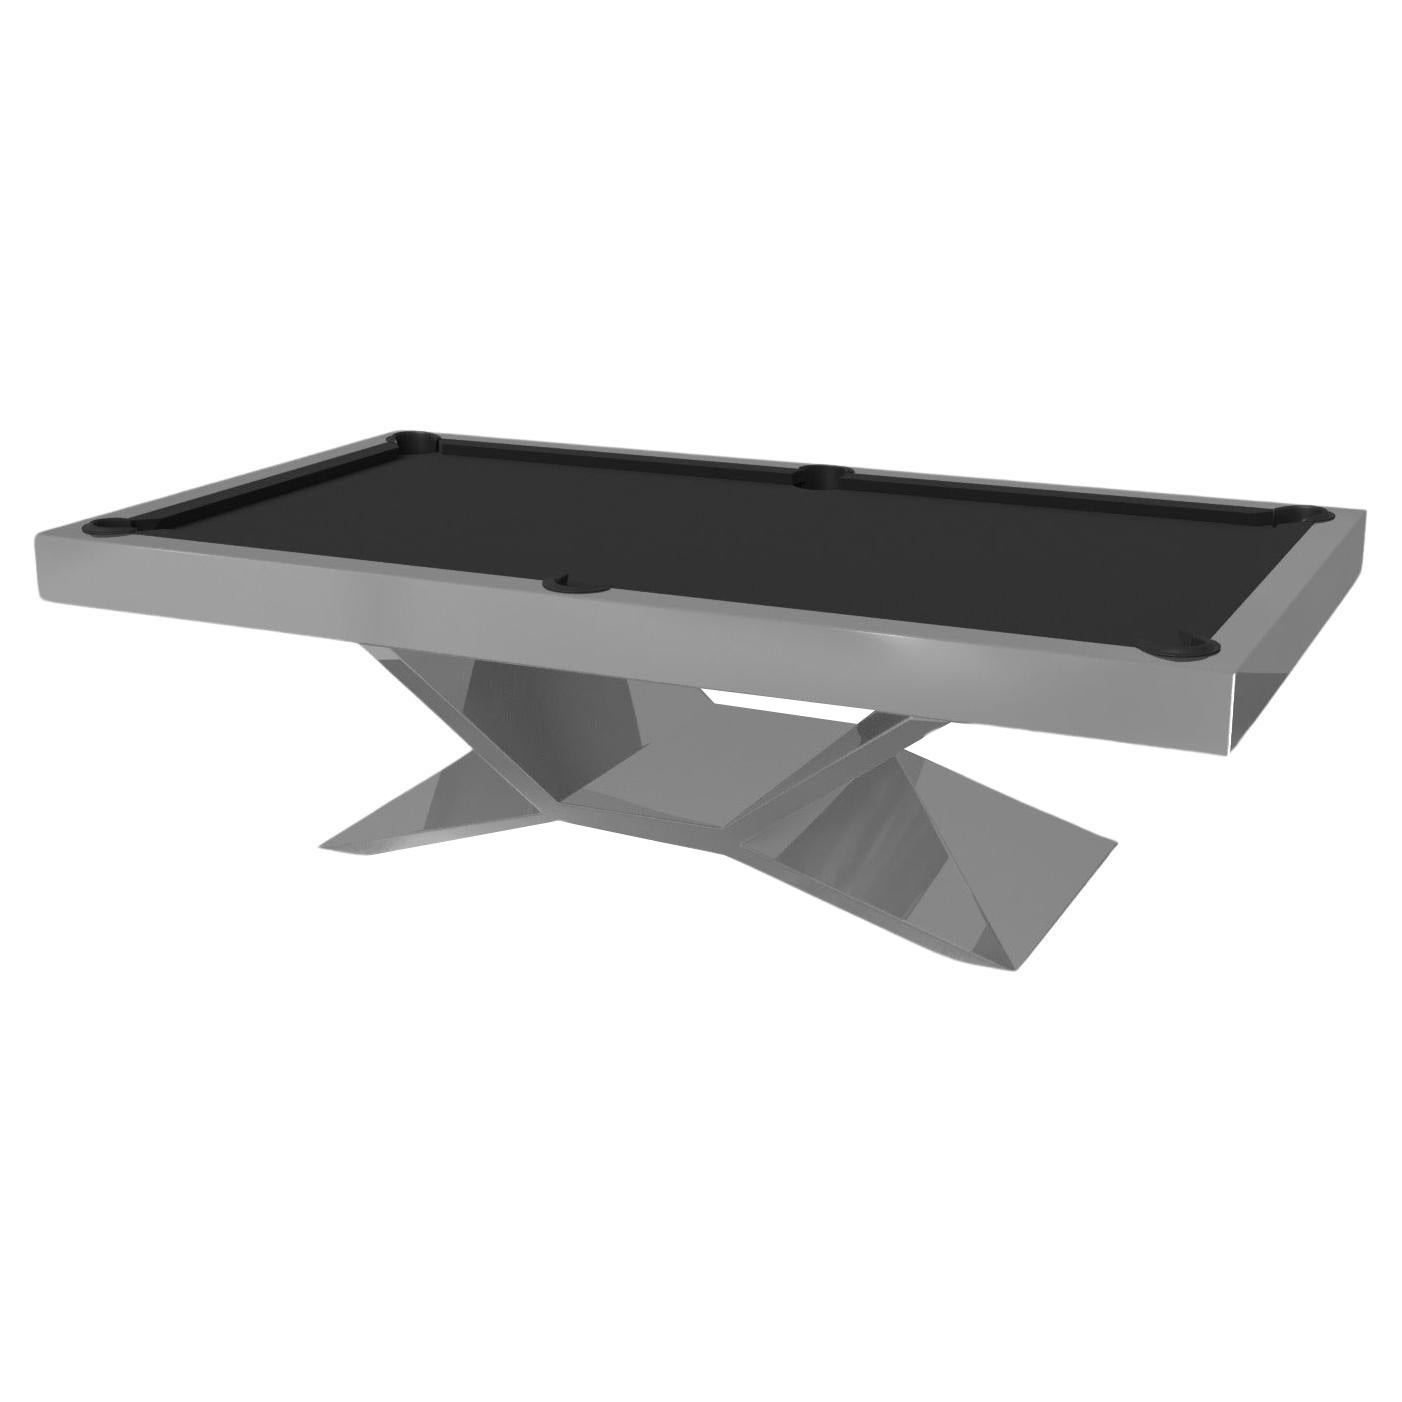 Elevate Customs Kors Pool Table / Stainless Steel Metal in 8.5 - Made in USA For Sale